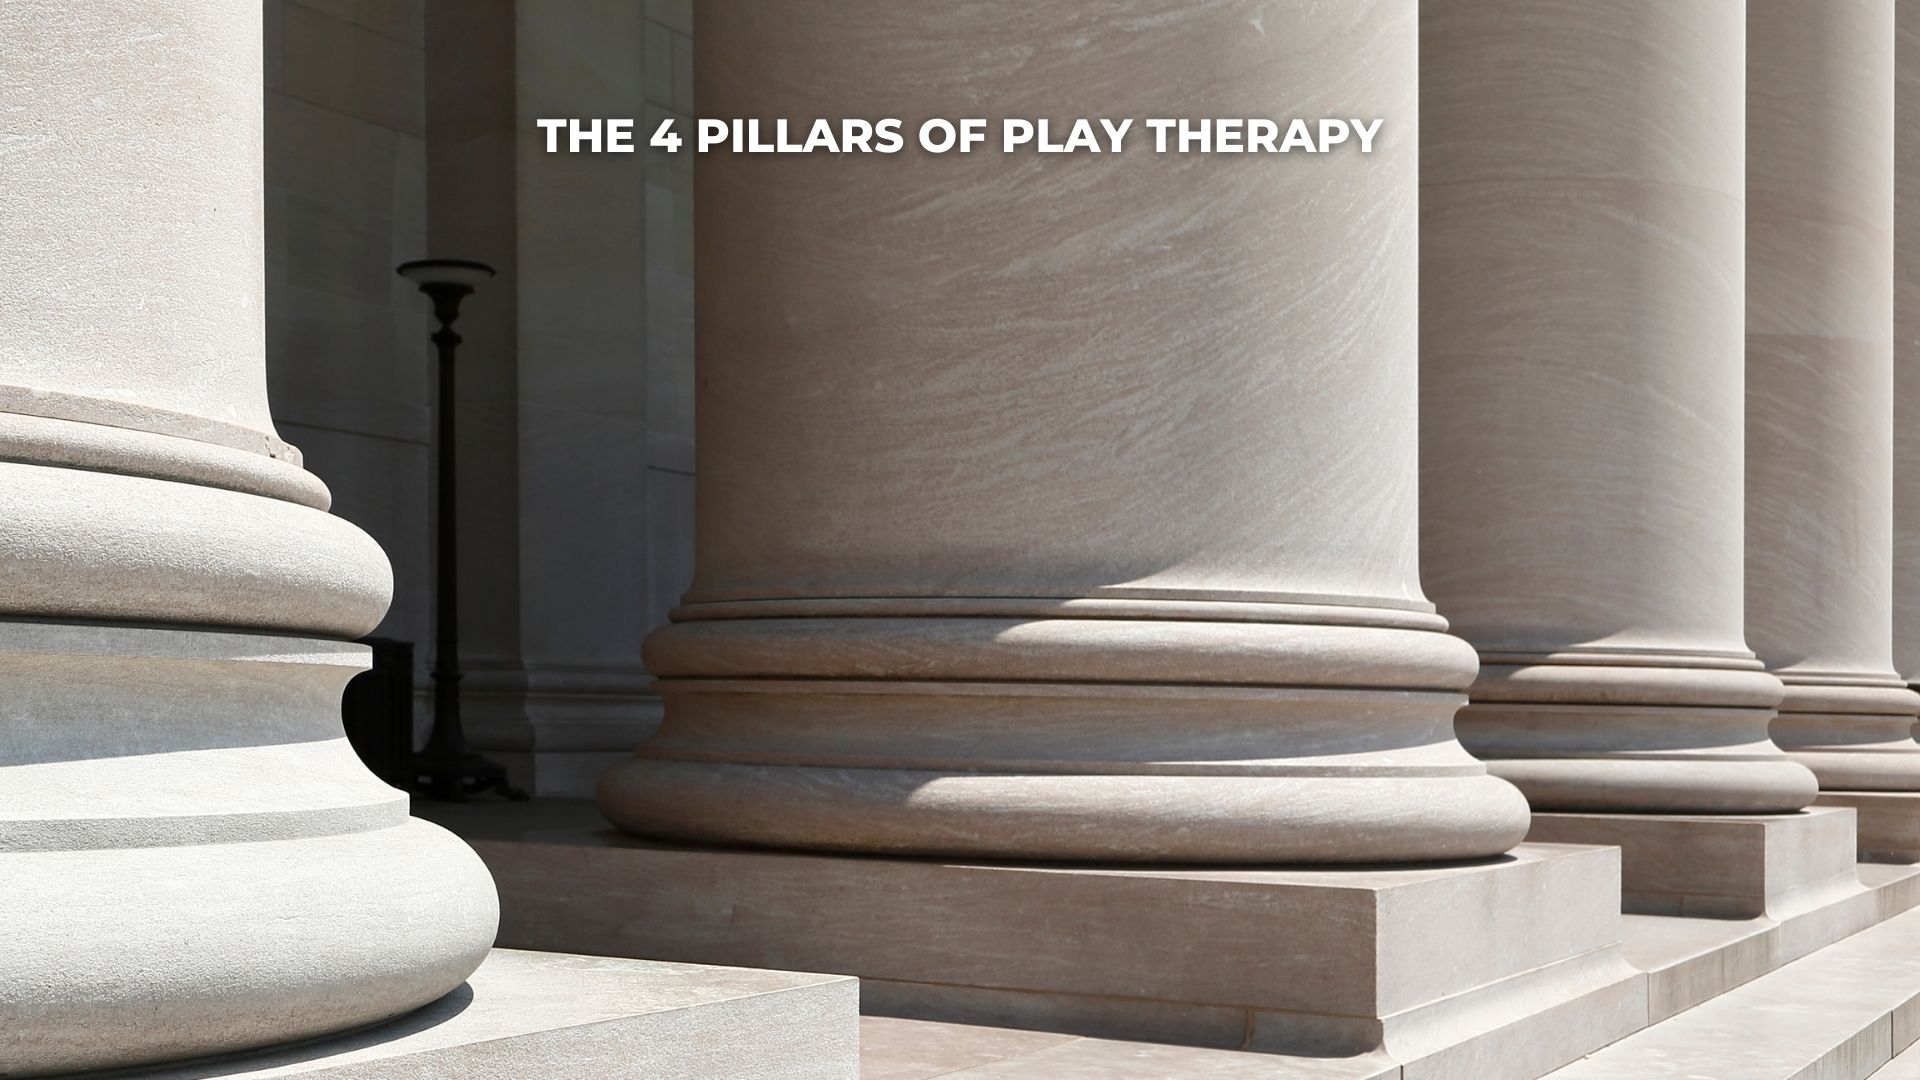 The “4 Pillars of Play Therapy” – A training presentation I gave to the 300 school and guidance counselors from the Hillsborough County School System in the Tampa, FL area.